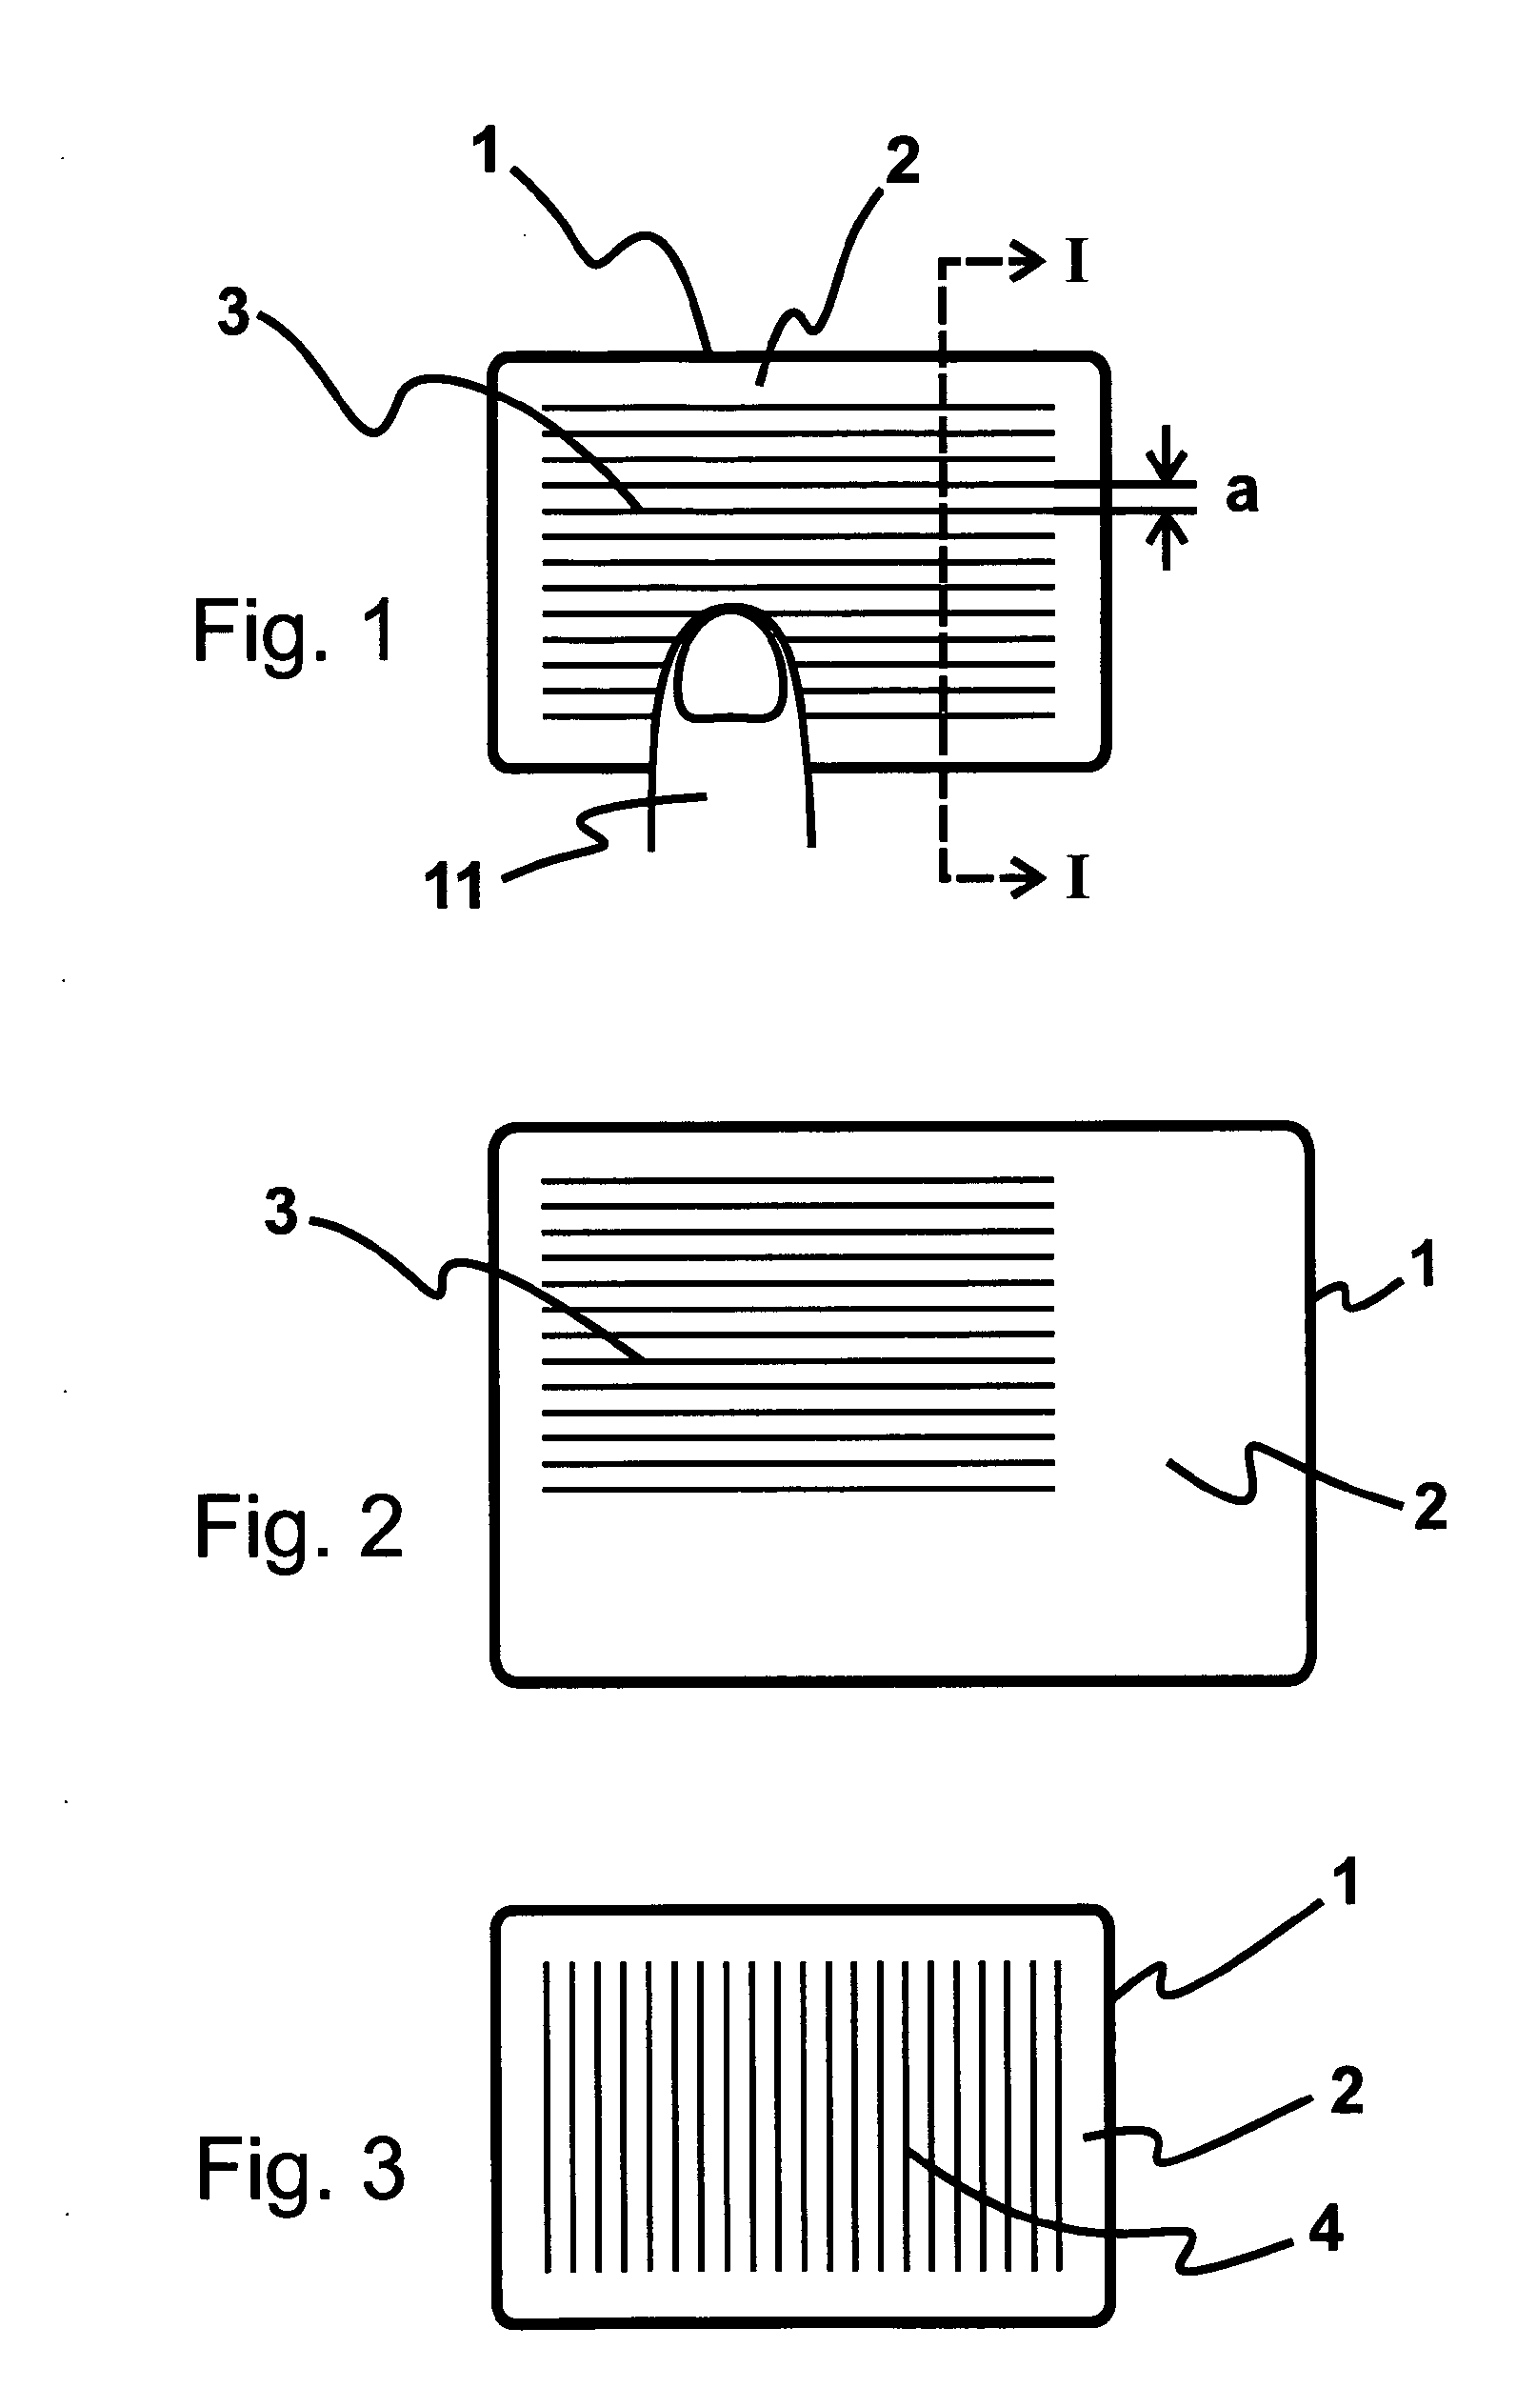 Touch-sensitive pointing device with guiding lines